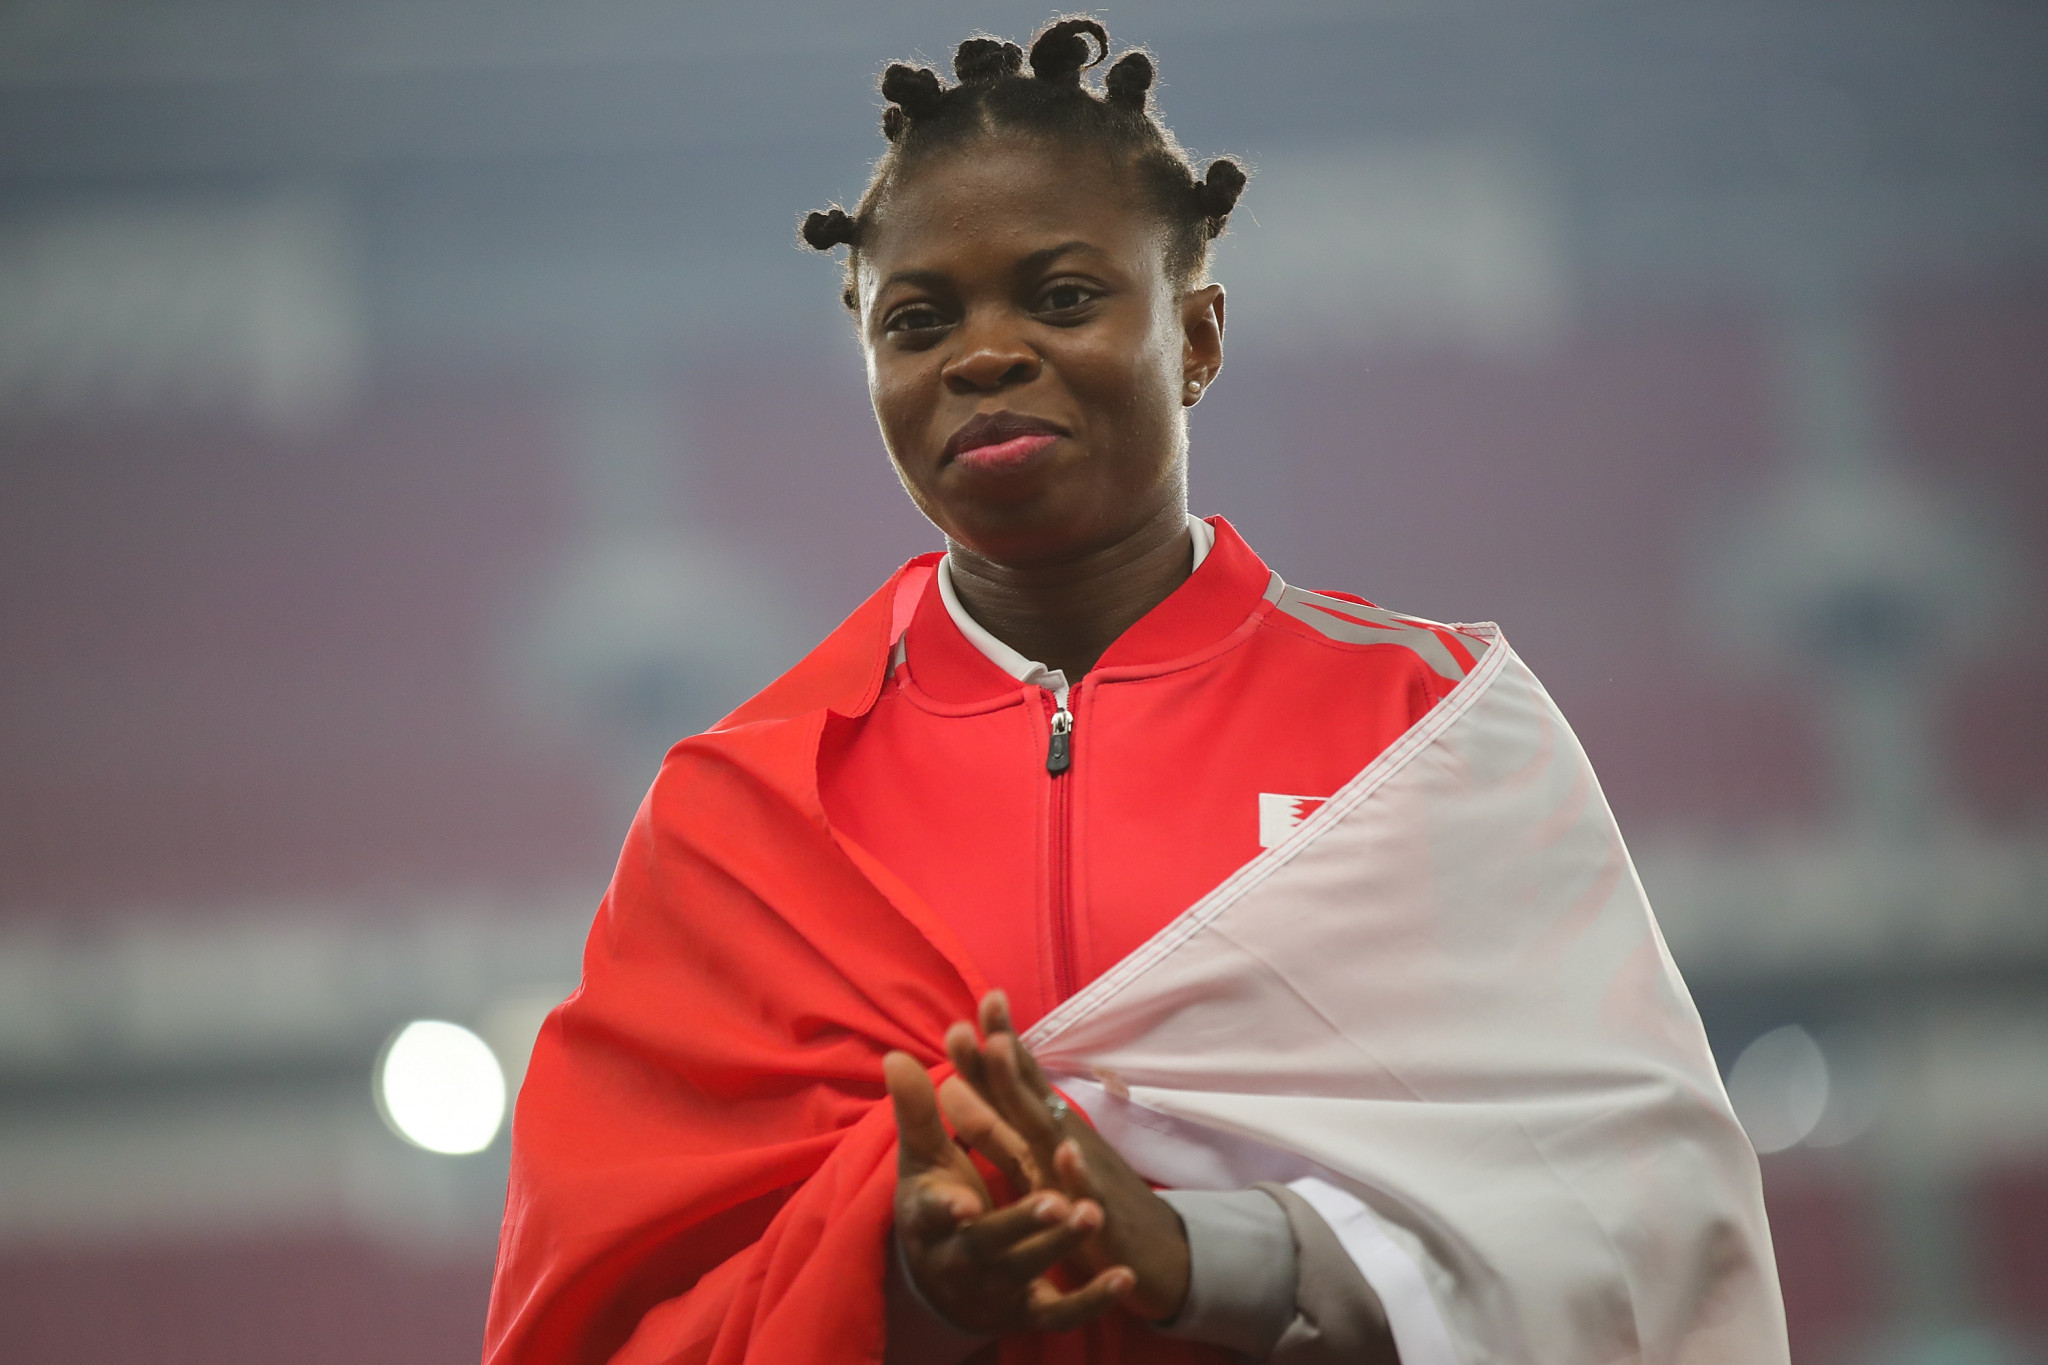 Bahraini 100m double highlights triumphant day of athletics at Pan Arab Games